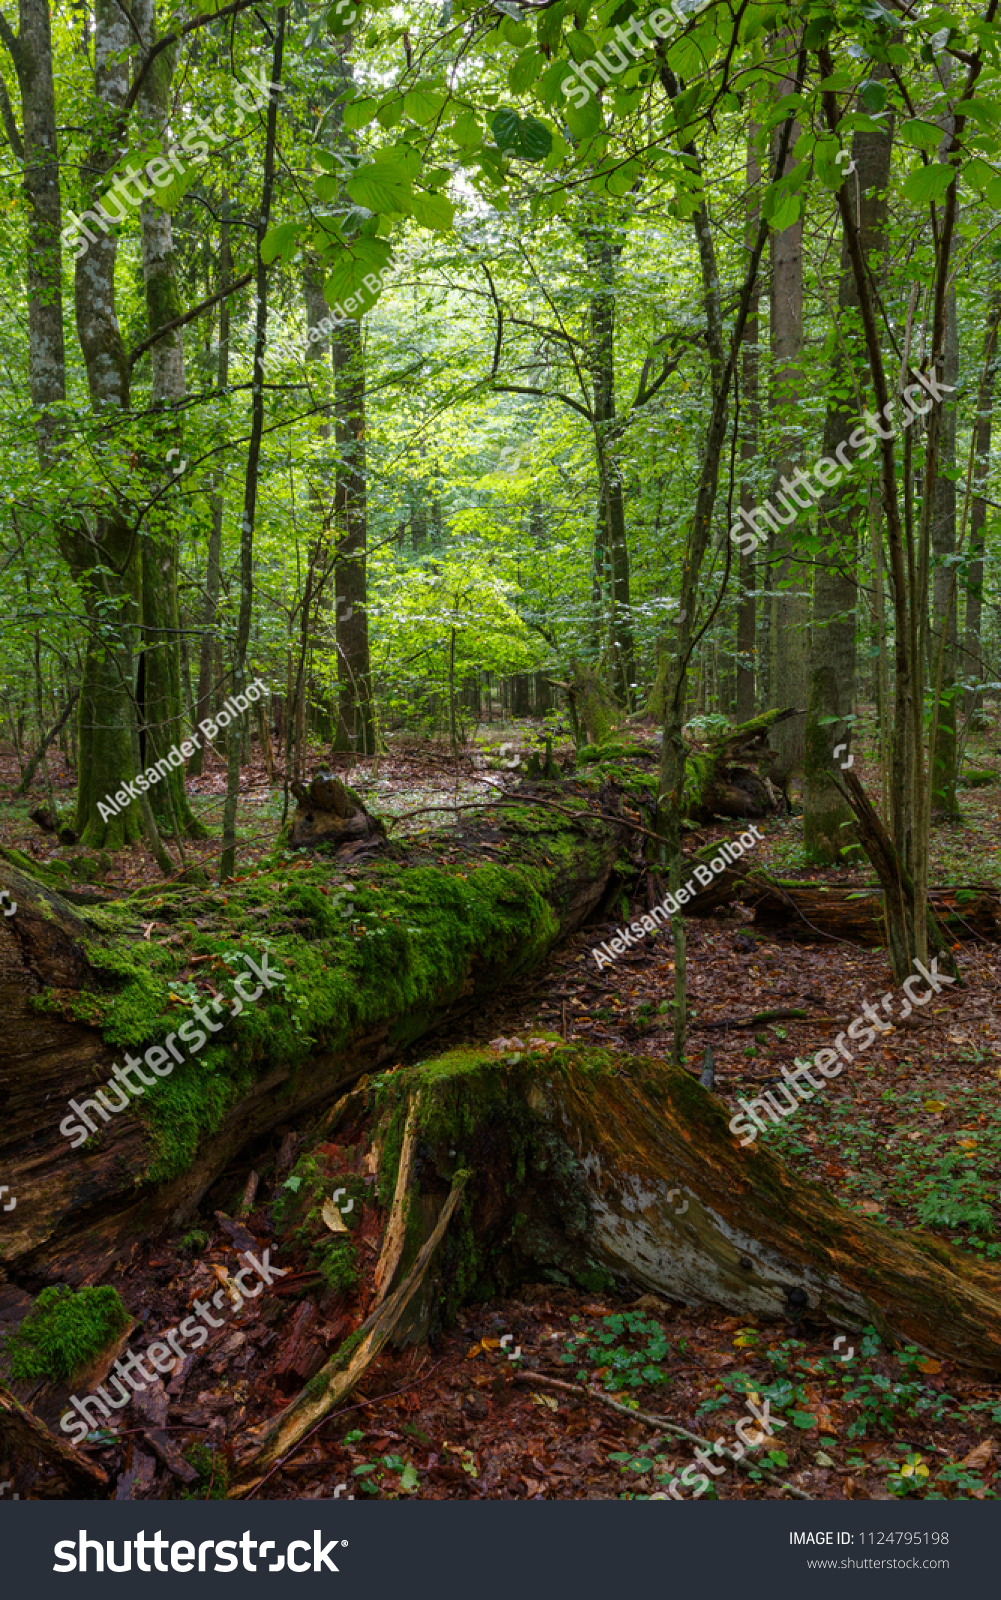 Fresh deciduous stand of Bialowieza Forest in summer with dead broken oak tree partly declined in foreground,Bialowieza Forest,Poland,Europe #1124795198